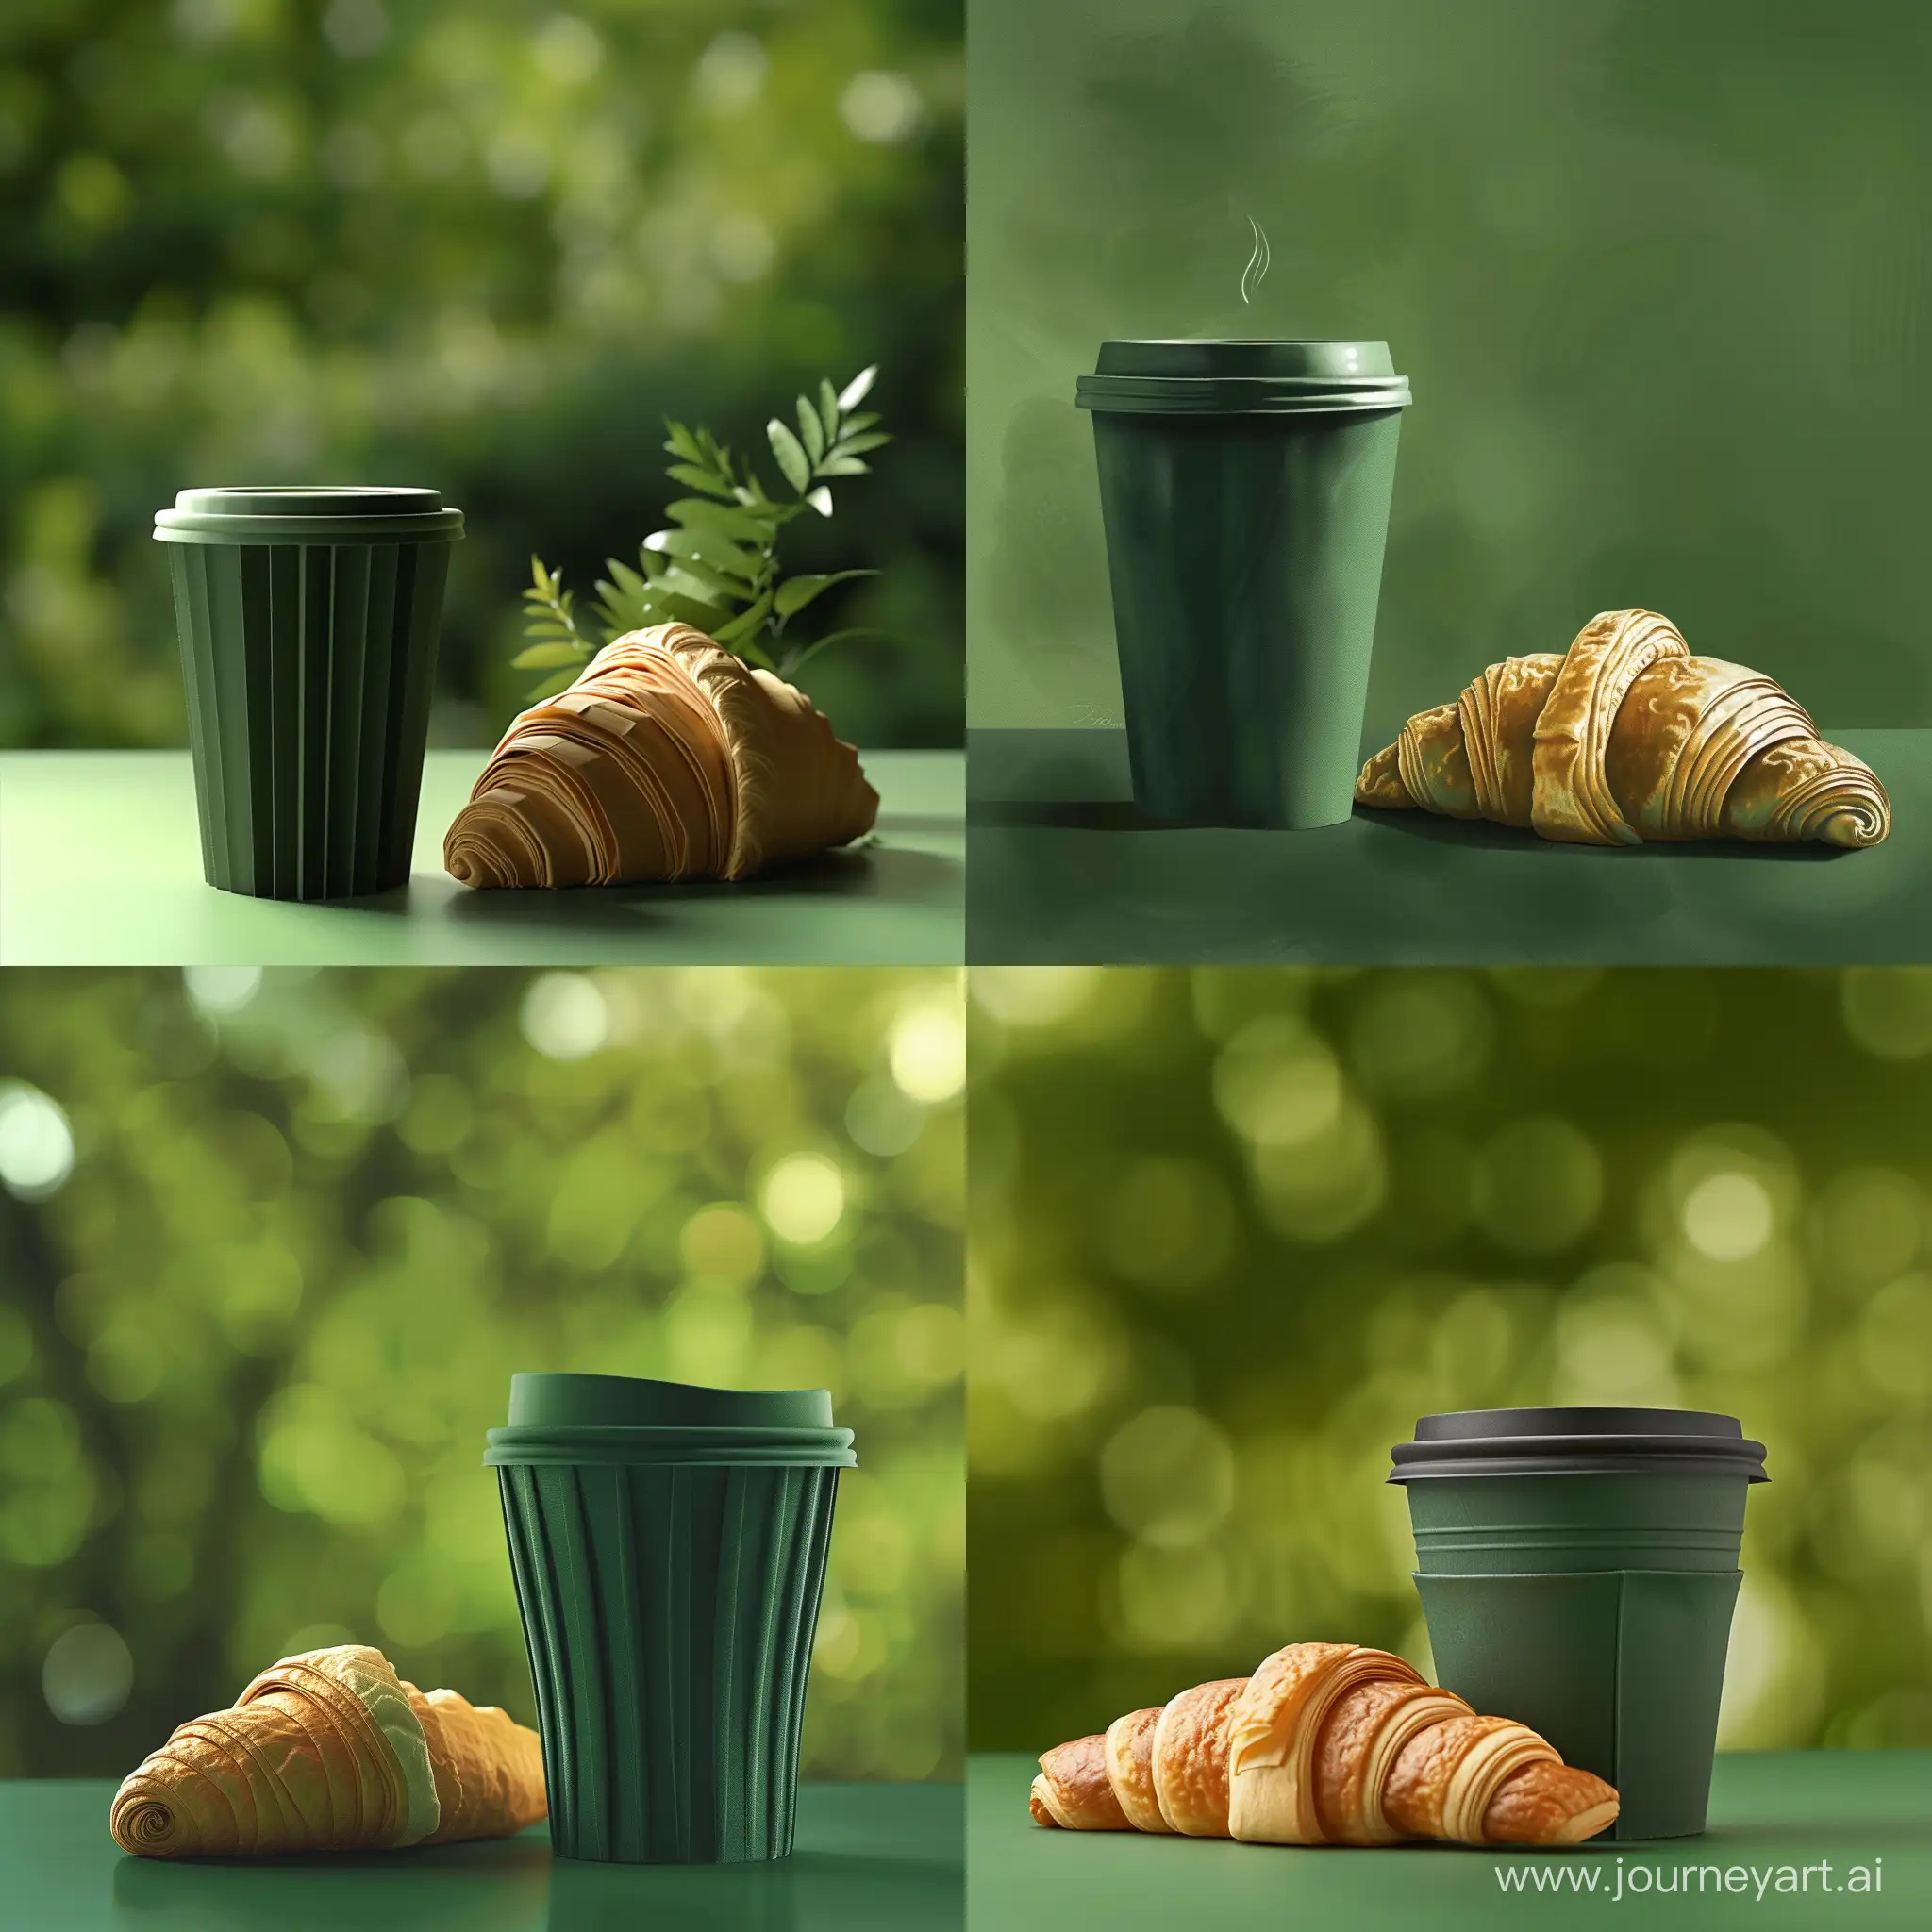 Dark-Green-Paper-Coffee-Cup-and-Croissant-on-Blurred-Green-Background